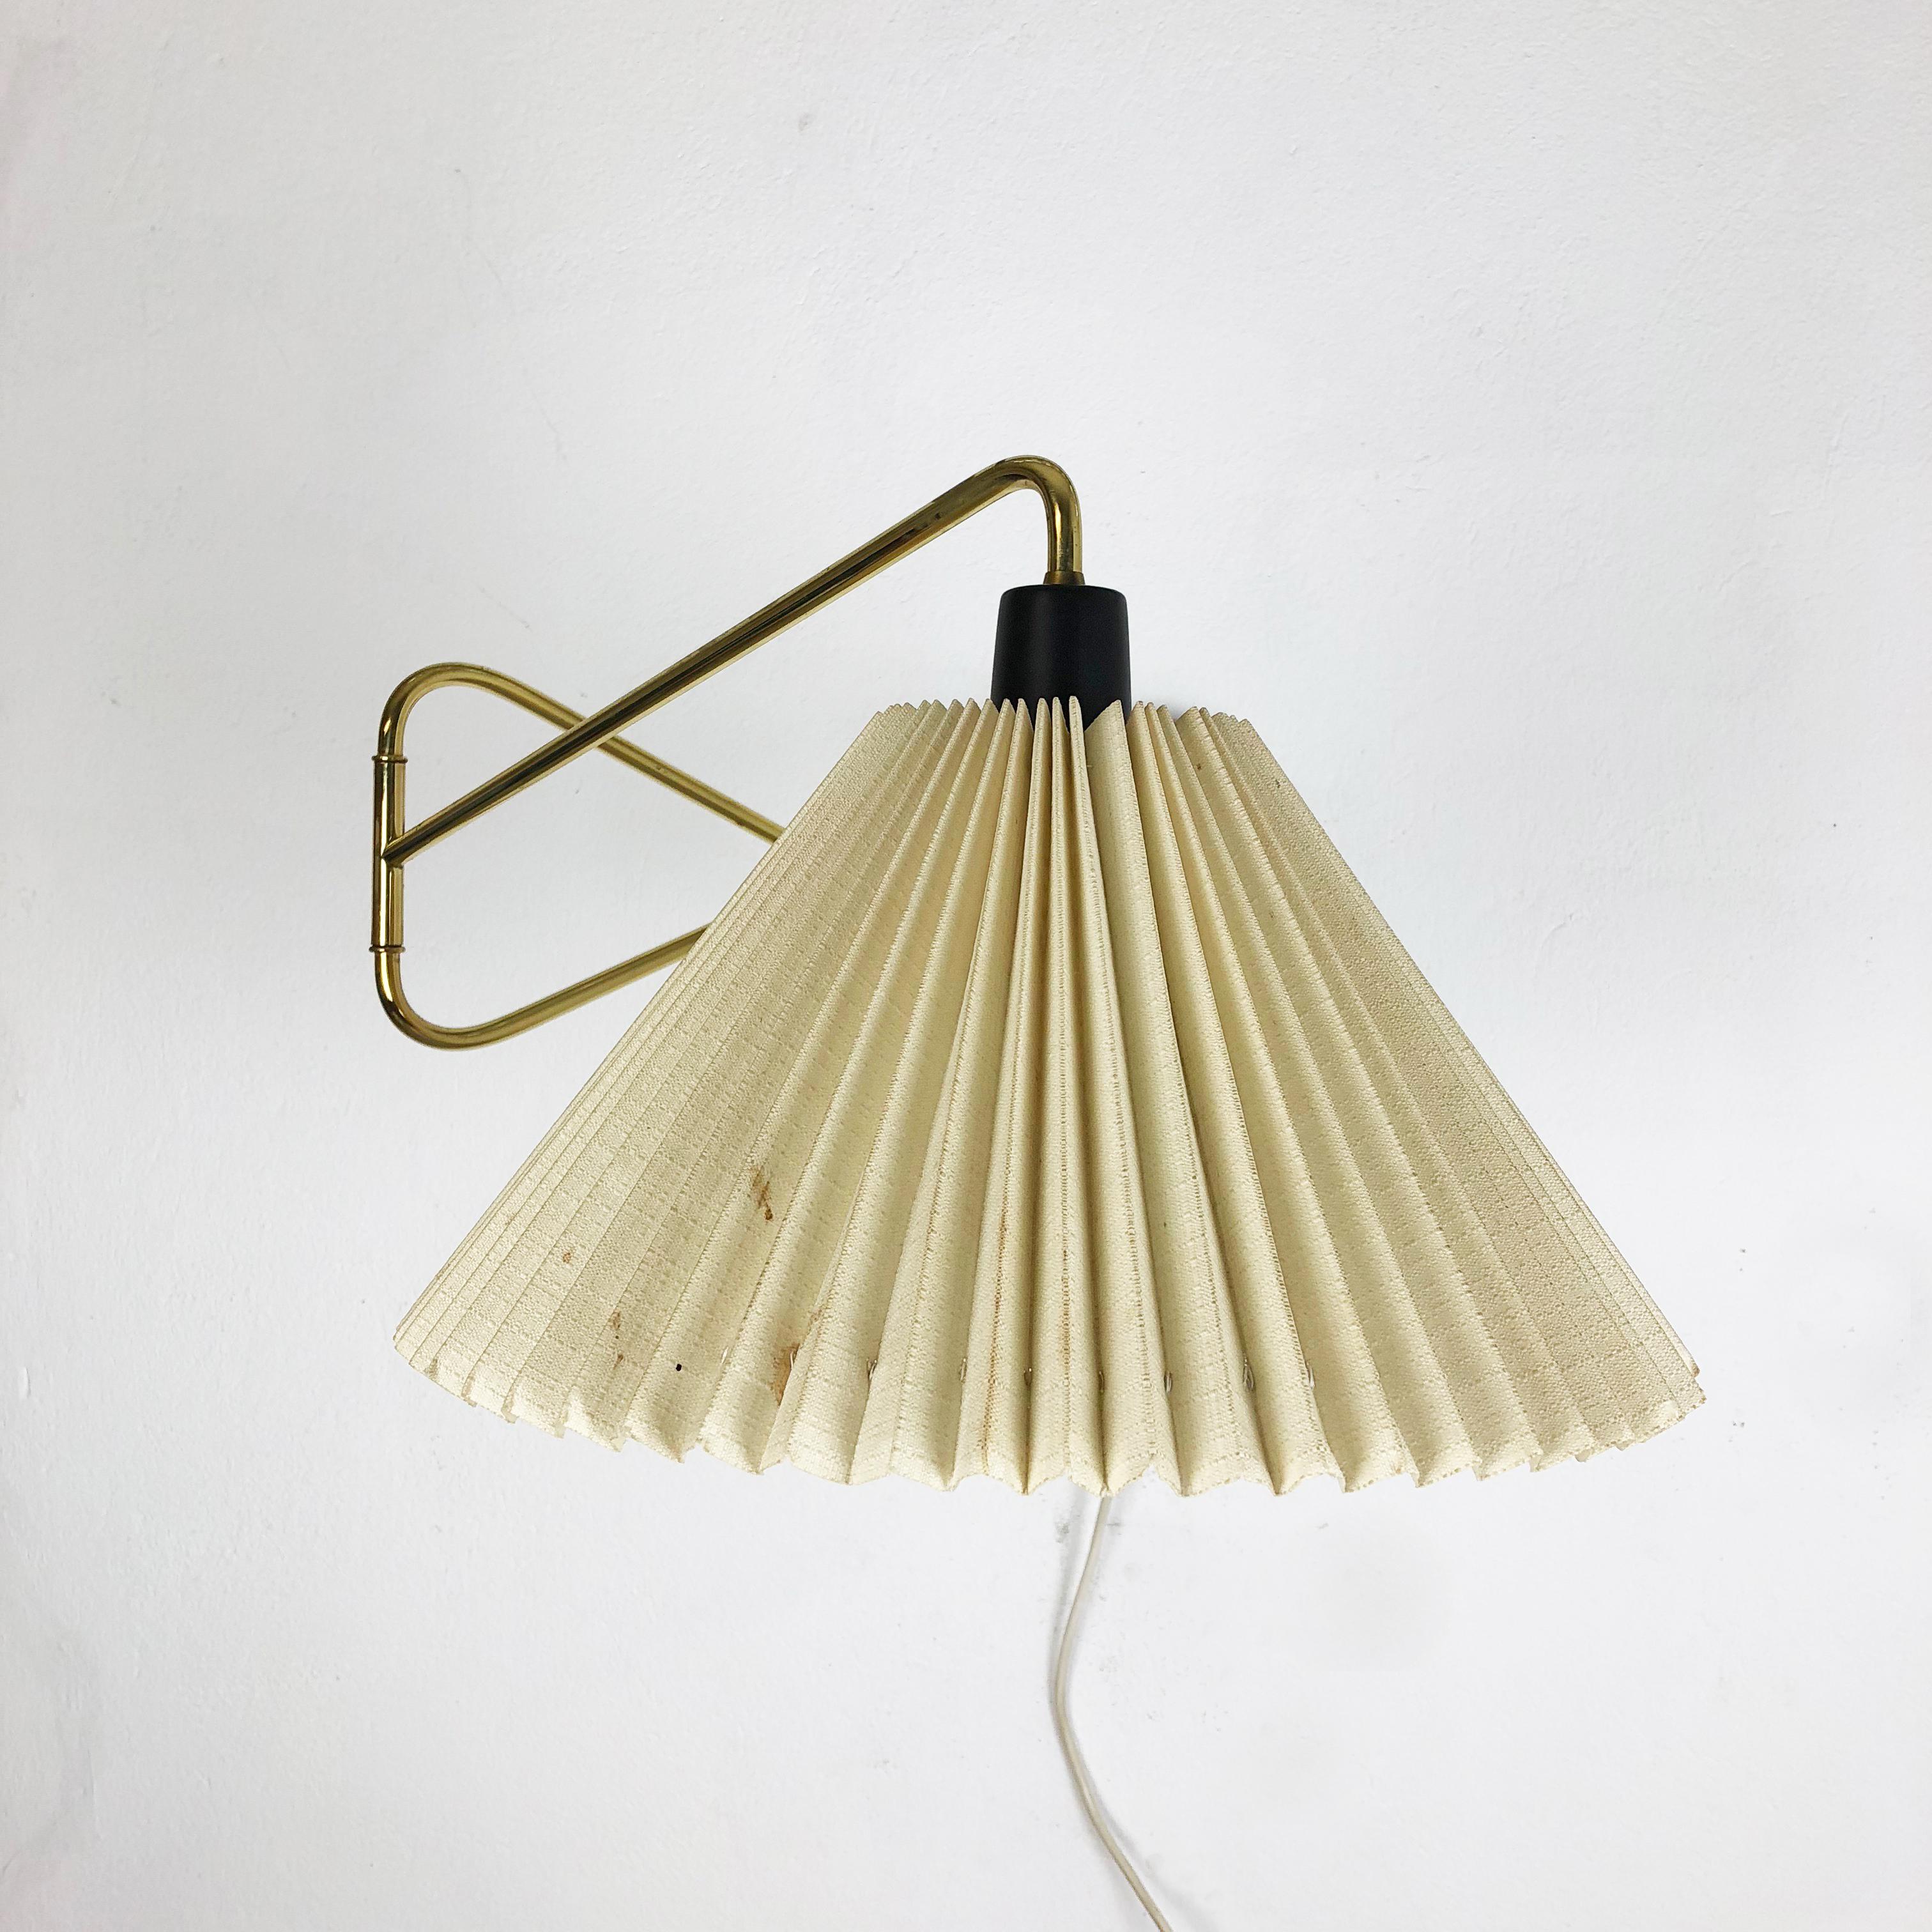 Original Modernist 1950s Brass Metal Swing Wall Light Made by Cosack, Germany 8